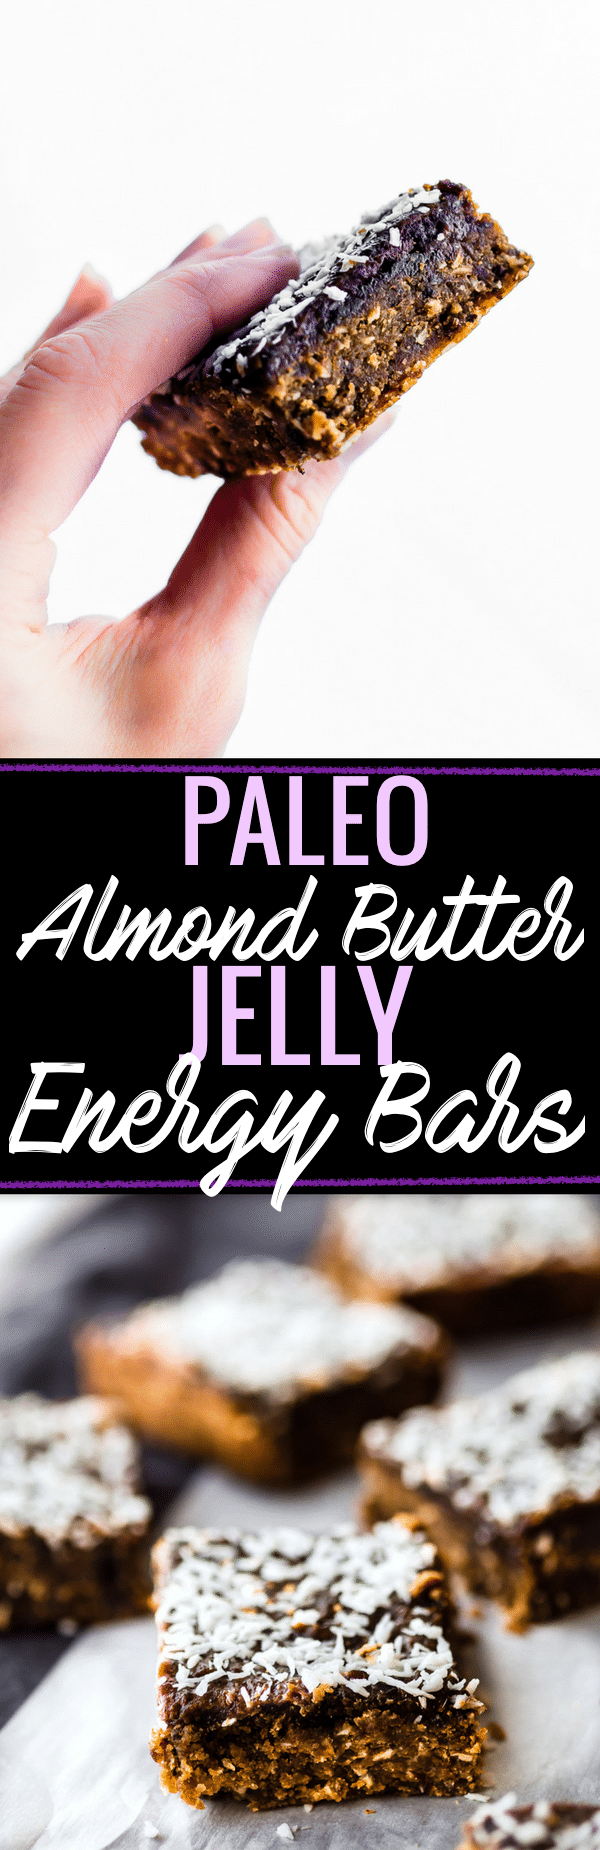 TThese Paleo Almond Butter Jelly Energy Bars are one of our favorite bars that fuel us for workouts and snacking on the go. Made with few ingredients; no oils and no sugar added. Blended and Baked in just 30 minutes, Which makes them pretty amazing! So chewy and flavorful that you'd never know they were healthy. Freezer friendly. www.cottercrunch.com